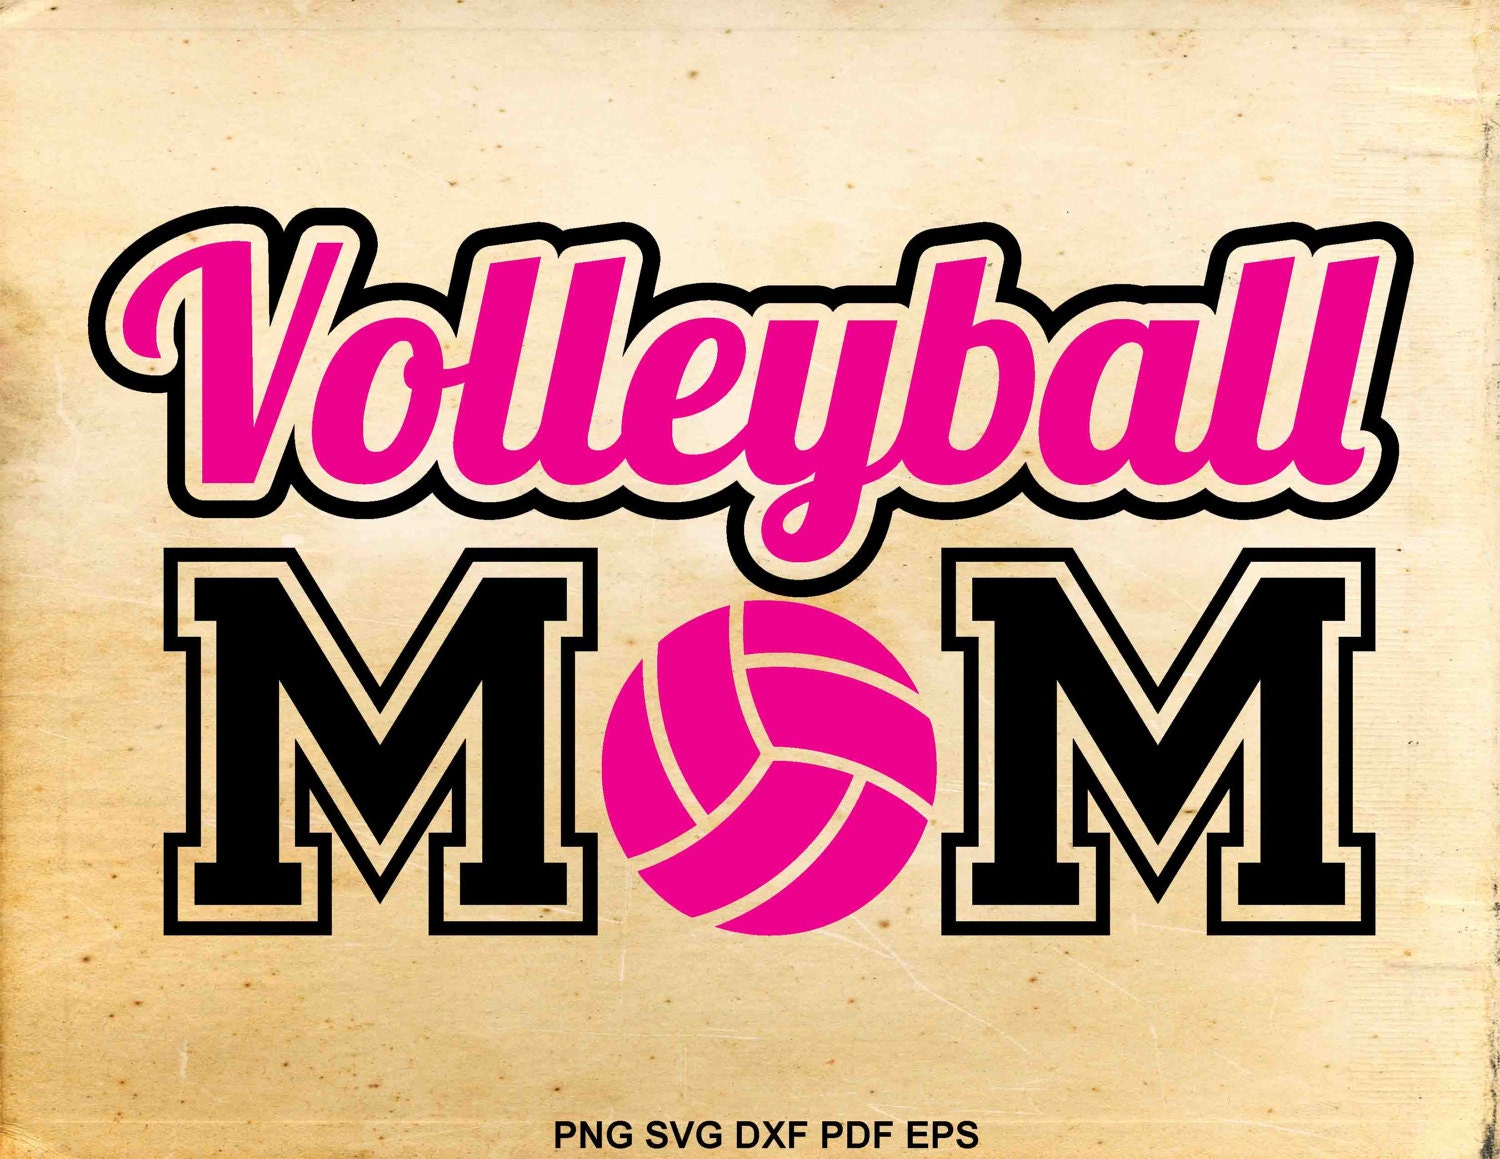 Download Volleyball mom svg Iron on designs Volleyball svg file Mom